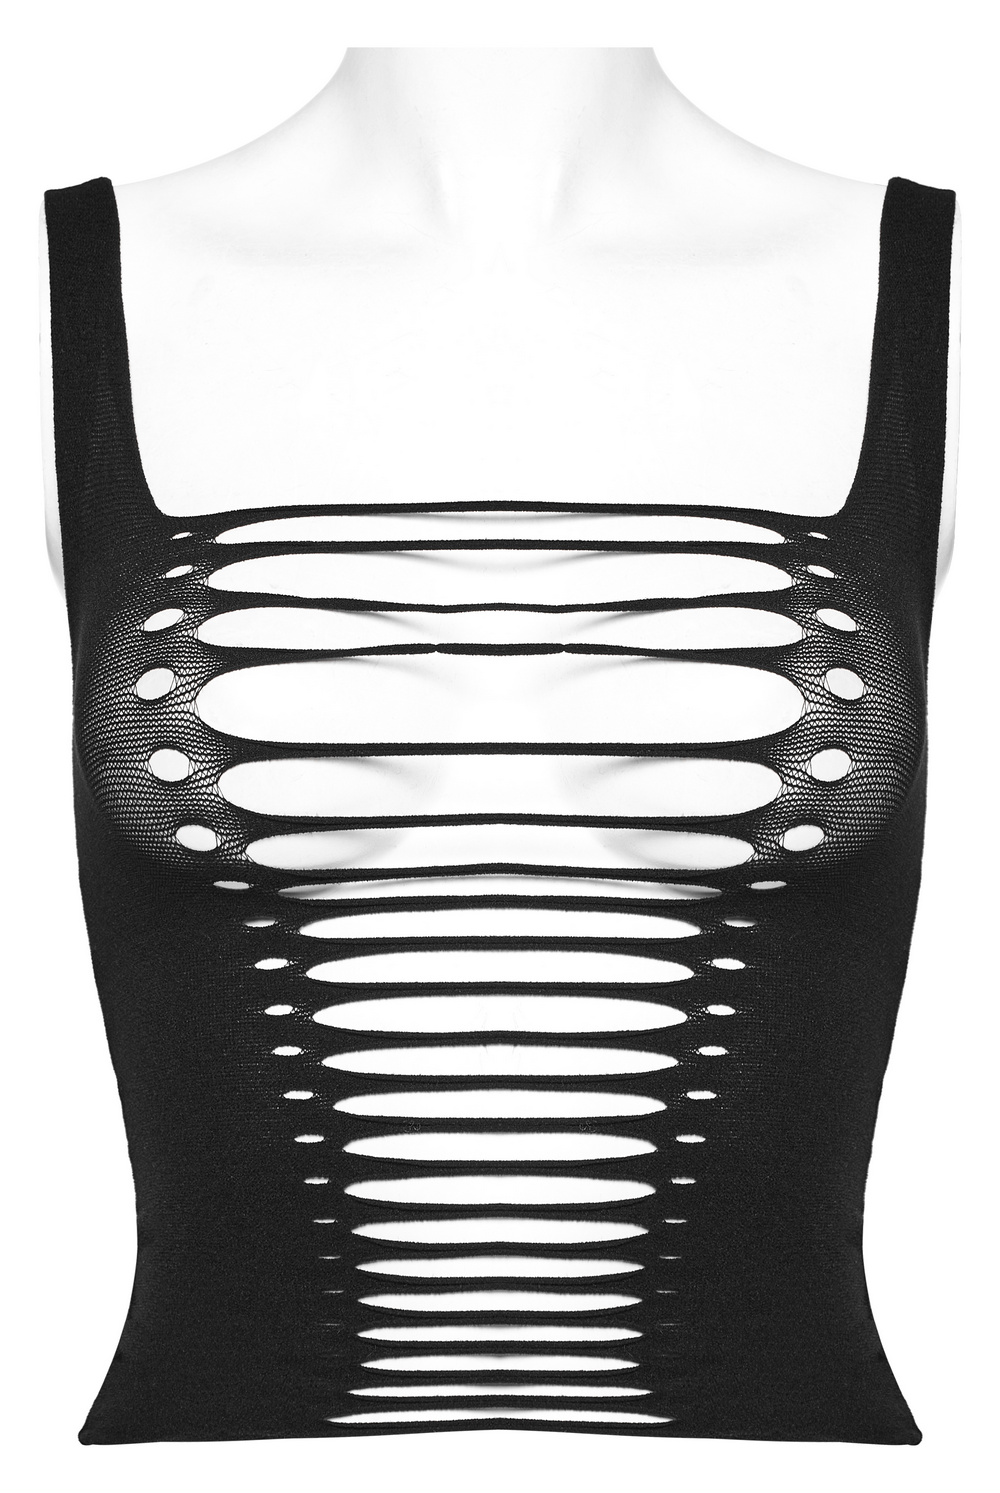 Punk Style Elastic Hollow-Out Black Tank Top for Women